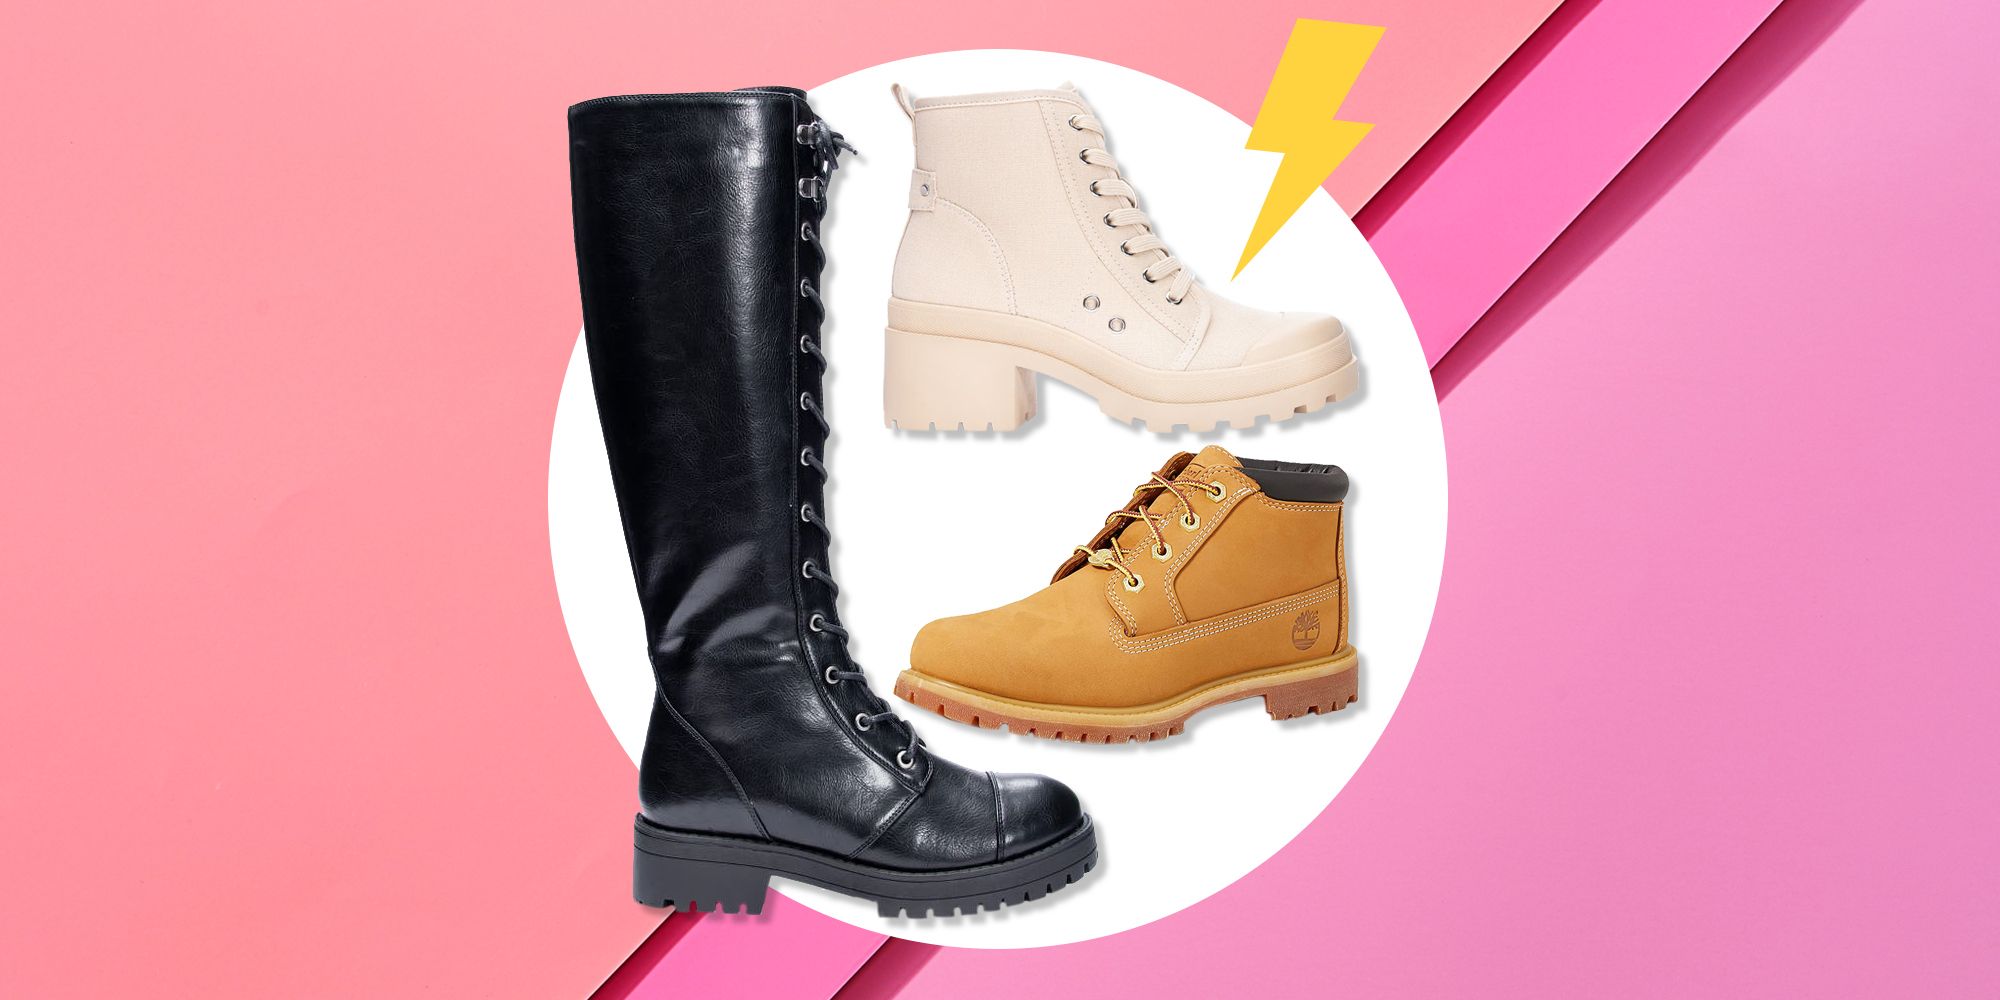 13 Best Shoes for Pregnancy: Shop Expert-Approved Picks From Uggs, Dr.  Scholl's & More